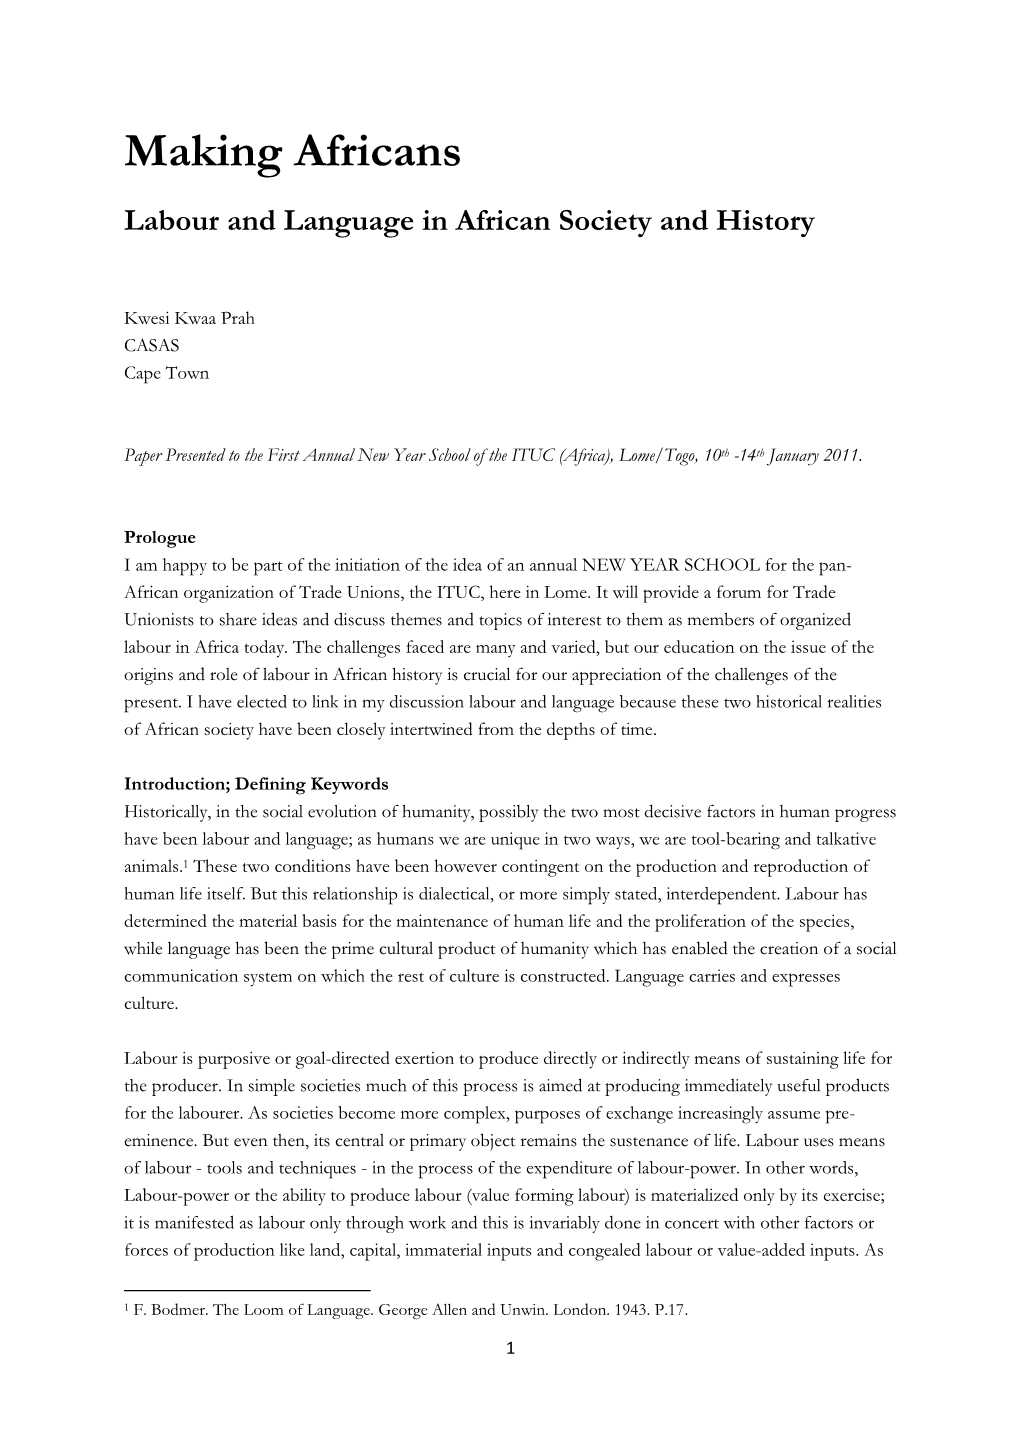 Observations on Labour and Language in African Society And